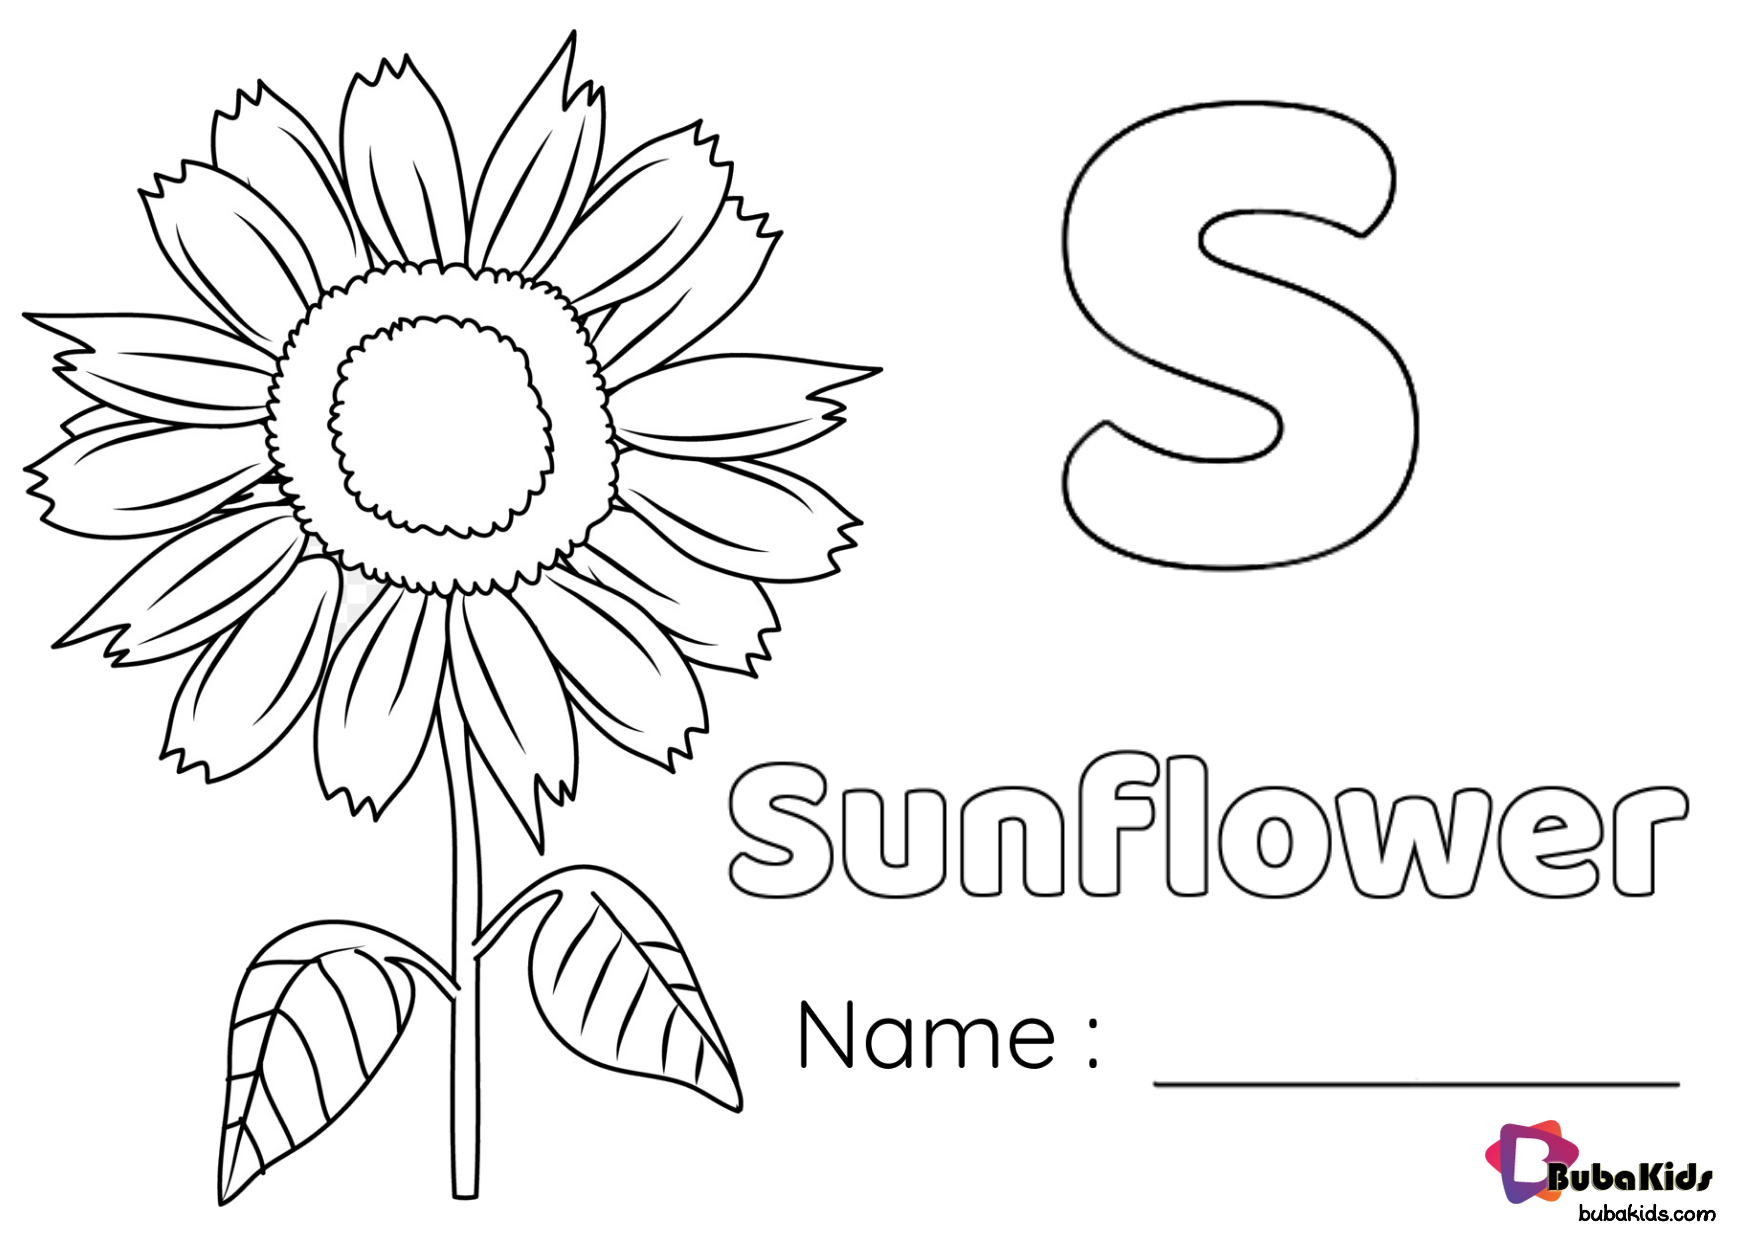 Learn alphabet letter S for Sunflower coloring page. Encourage fun and learning at the same time with bubakids. Wallpaper